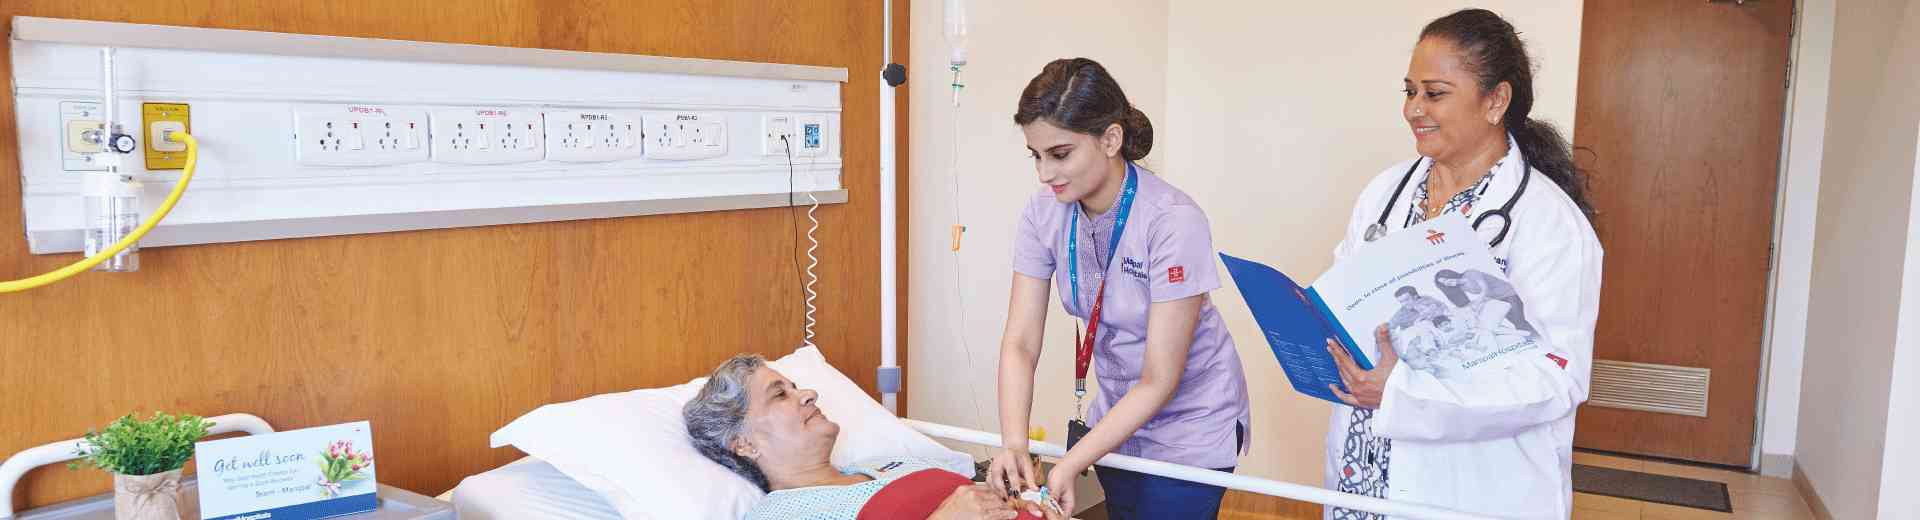 Outpatient Inpatient and Emergency services in Pune